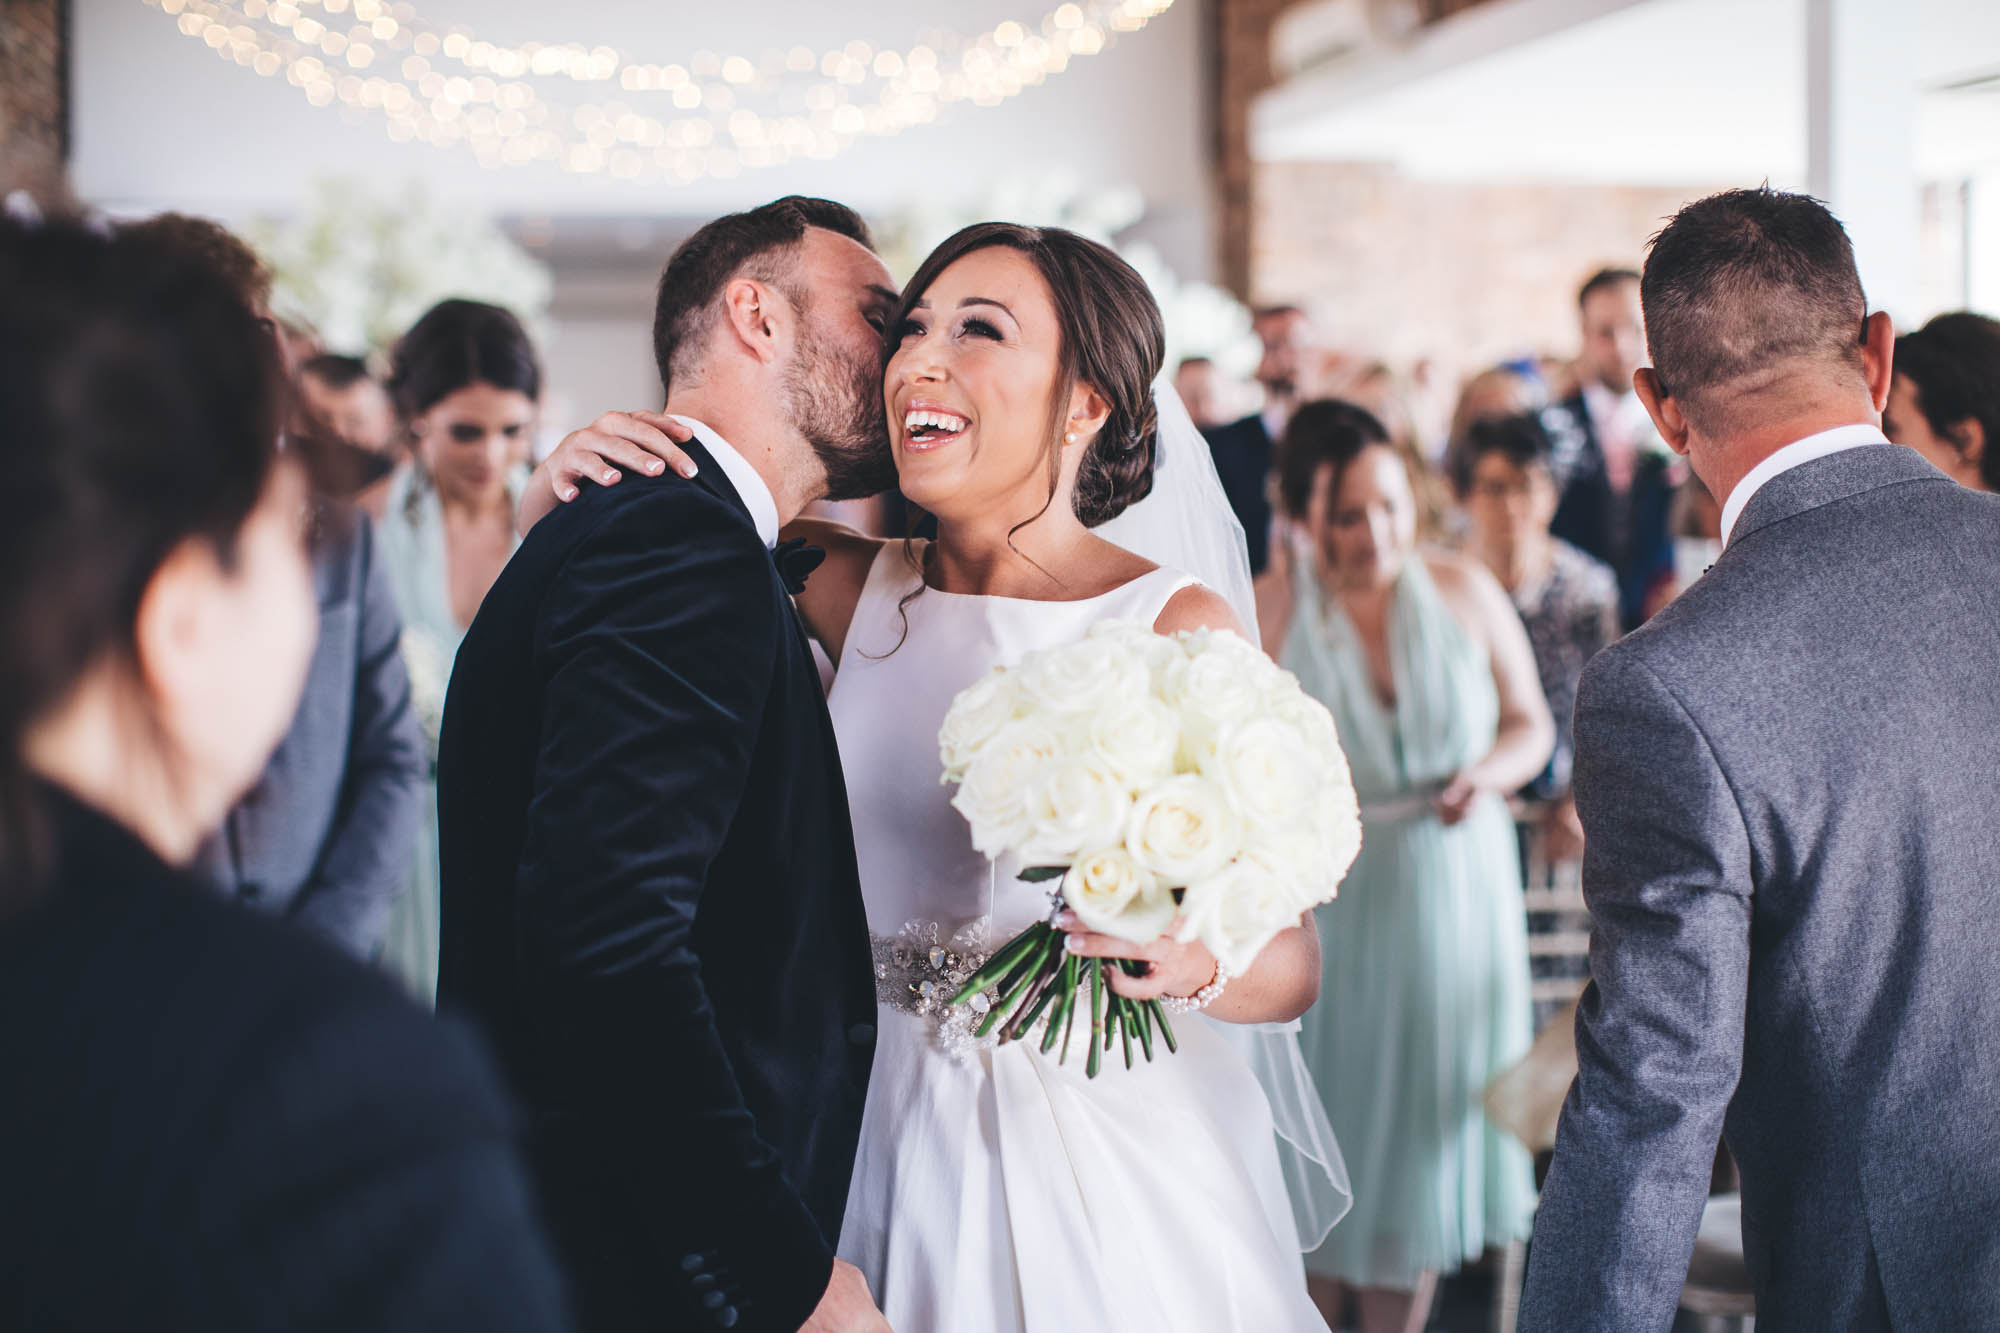 Groom greets Bride with a kiss on the cheek at the altar